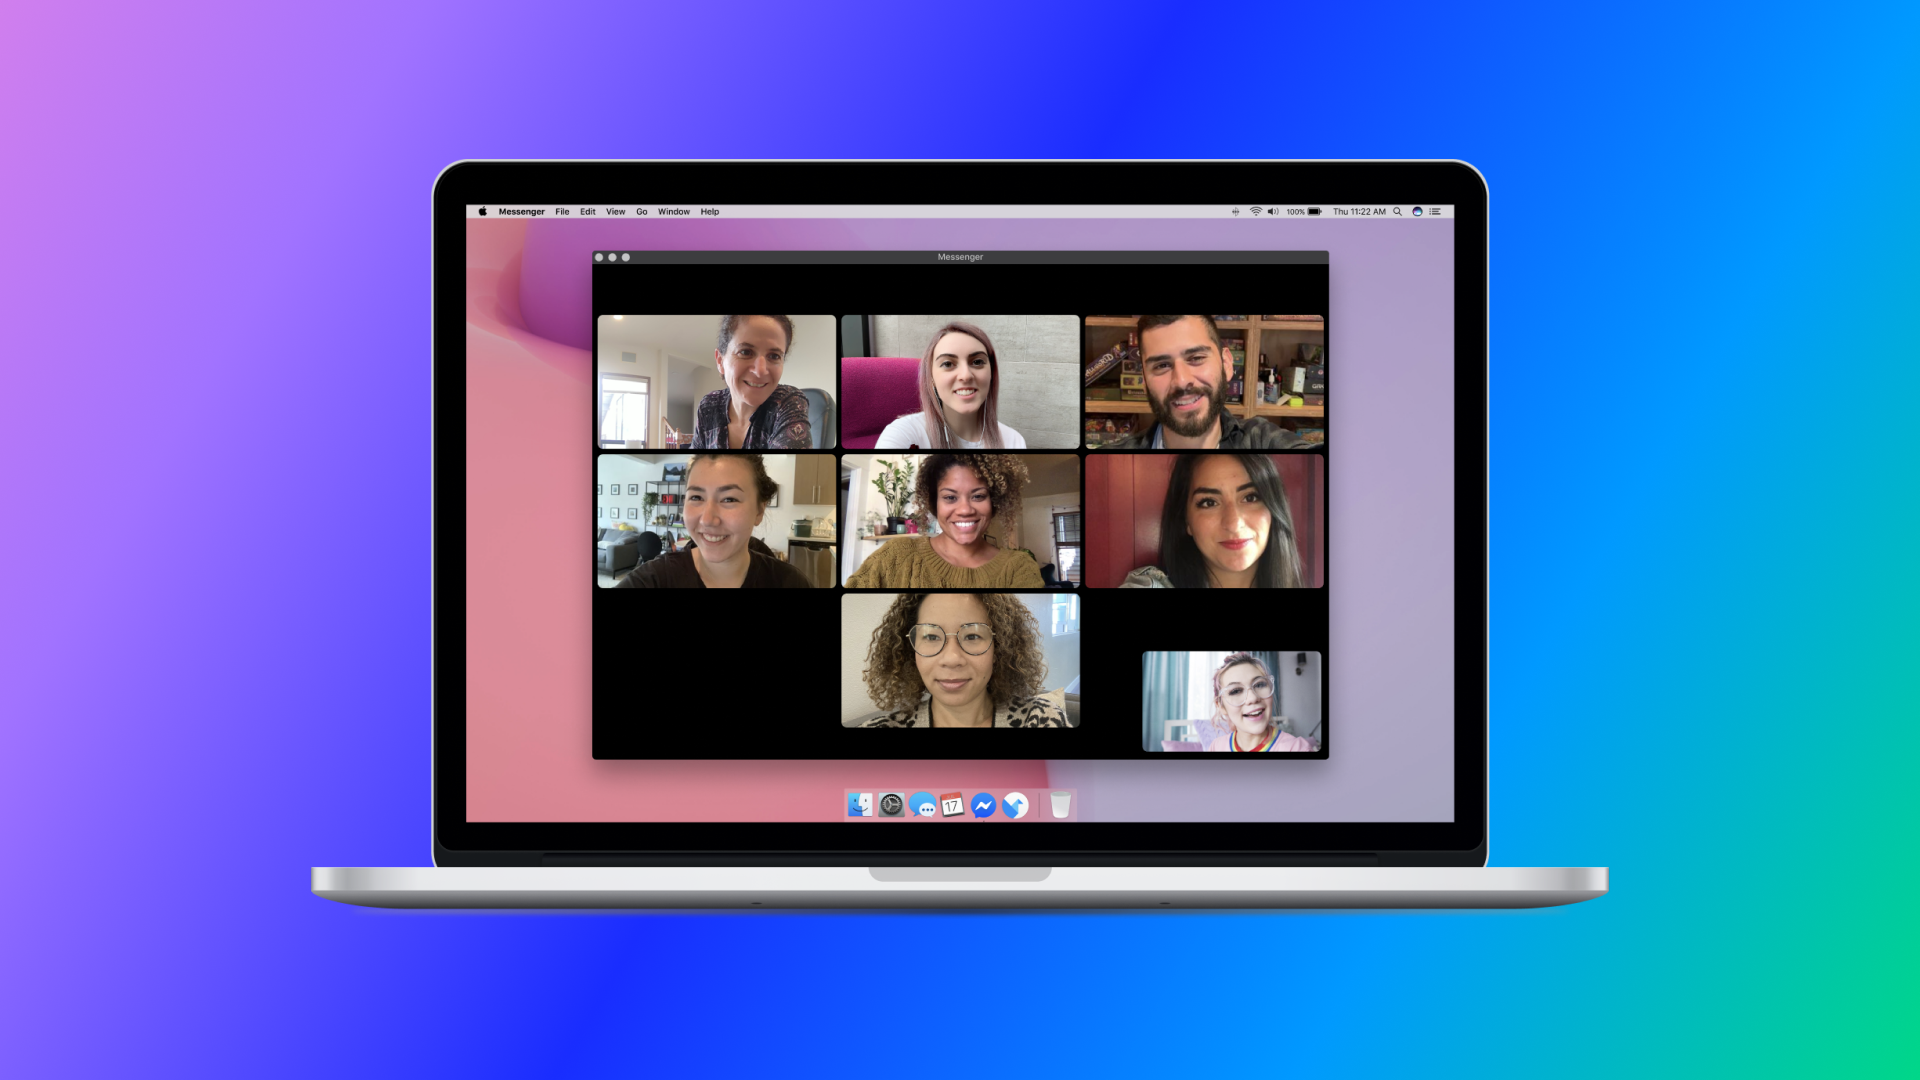 Computer showing a group of people on a video call in the Messenger desktop app